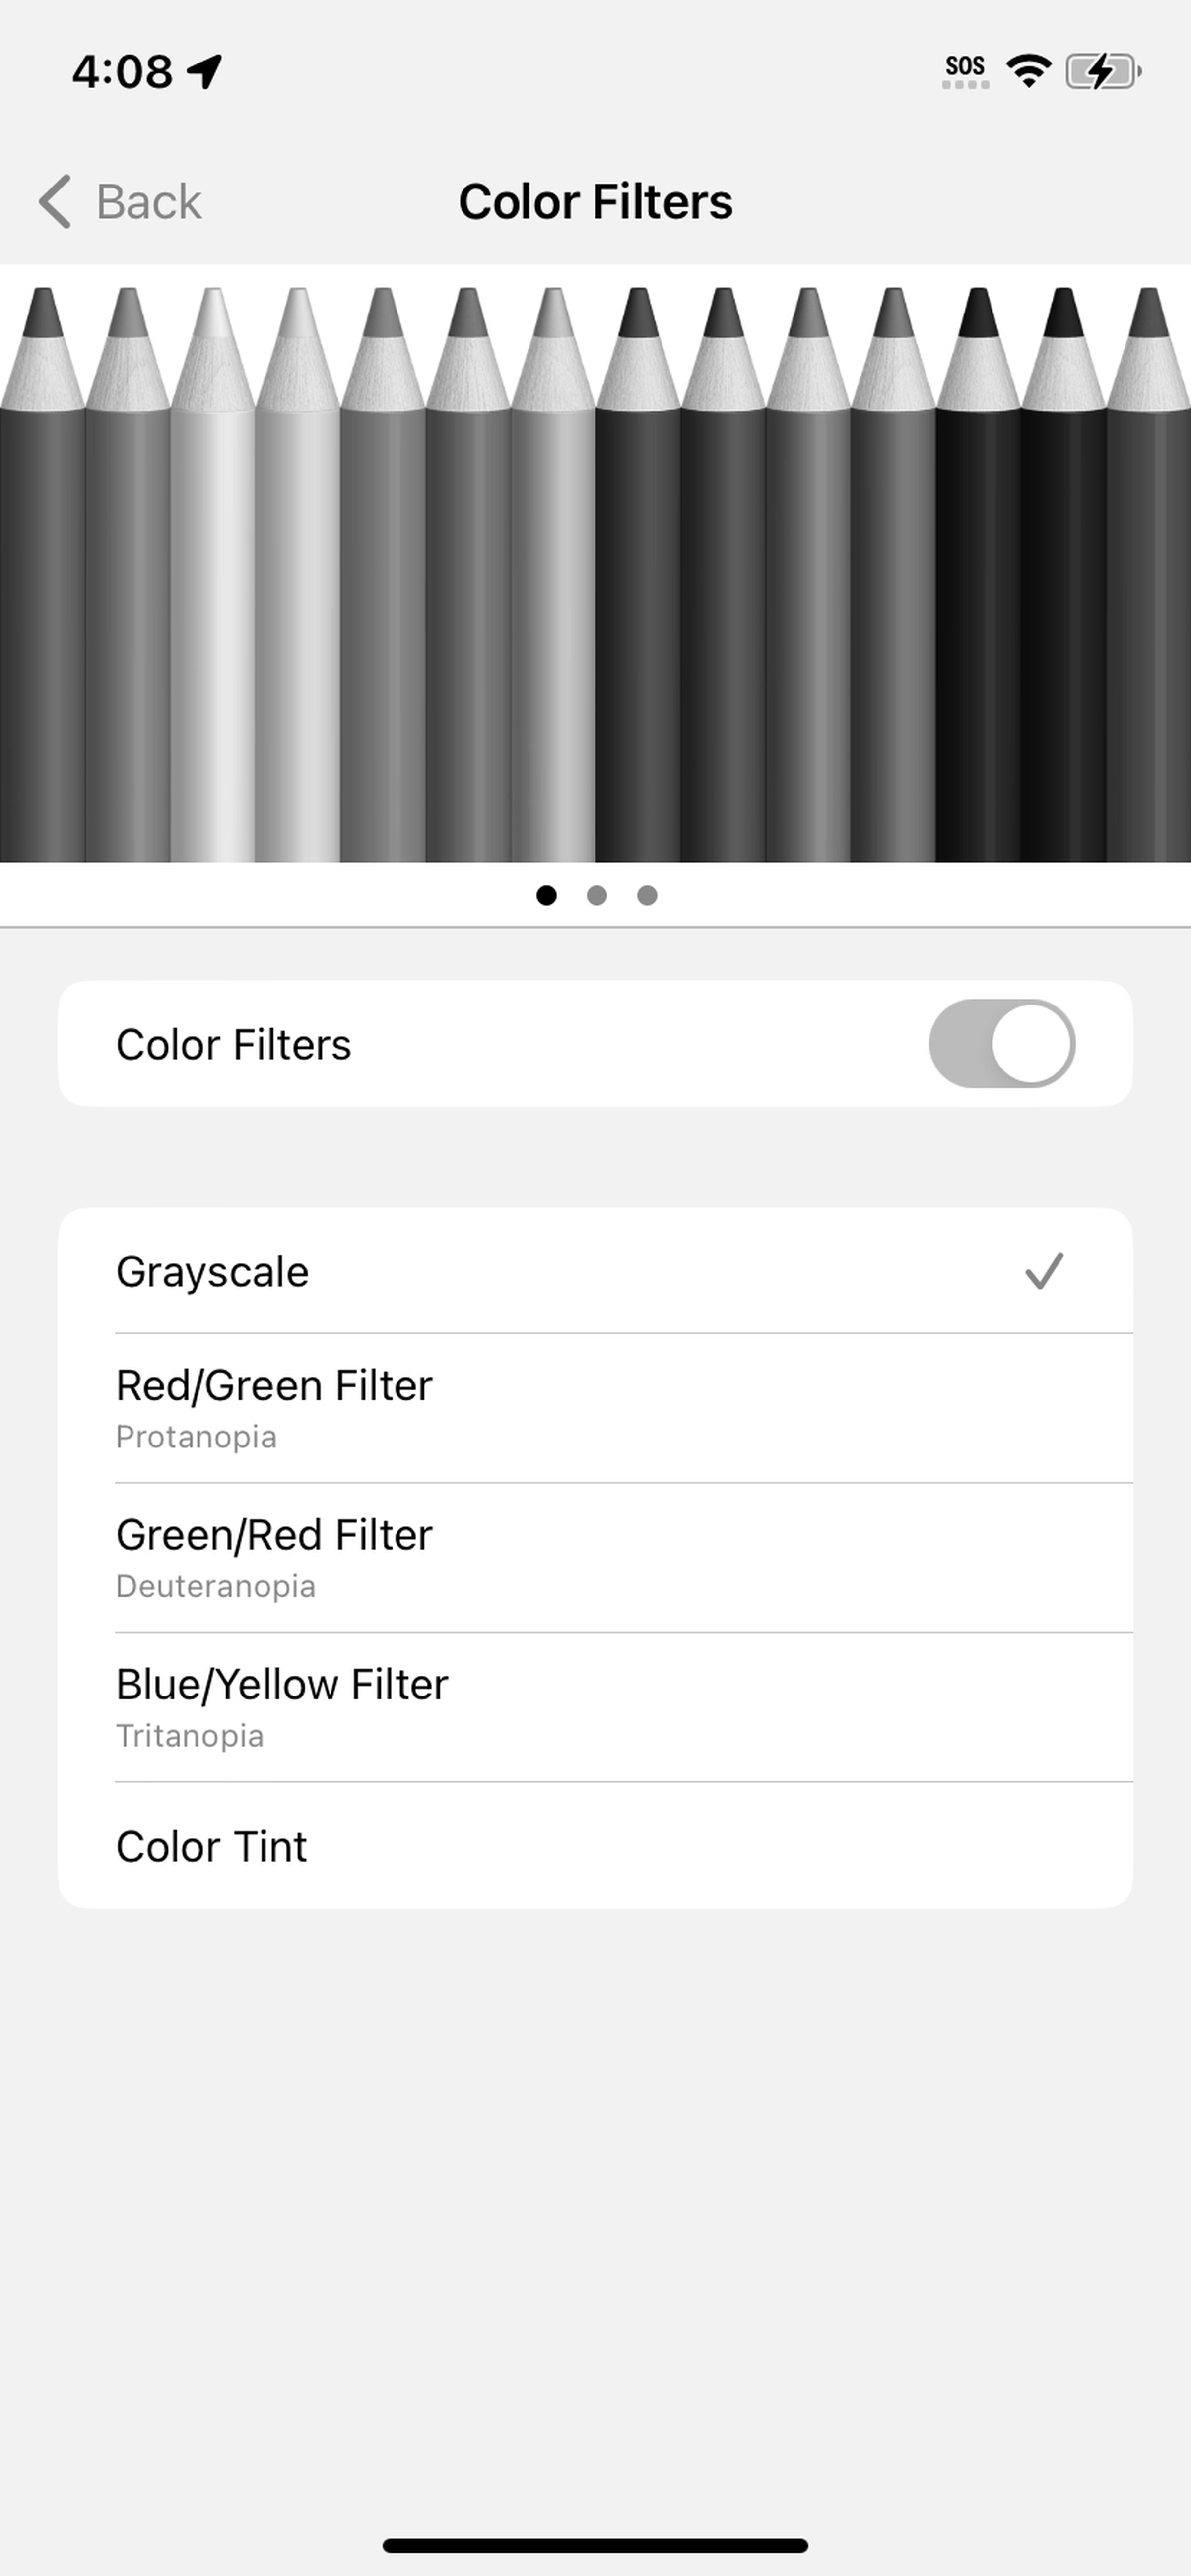 Color Filters page with colored pencils in grayscale on top, the Color Filters toggle below that, and other options such as Red/Green filter below that.